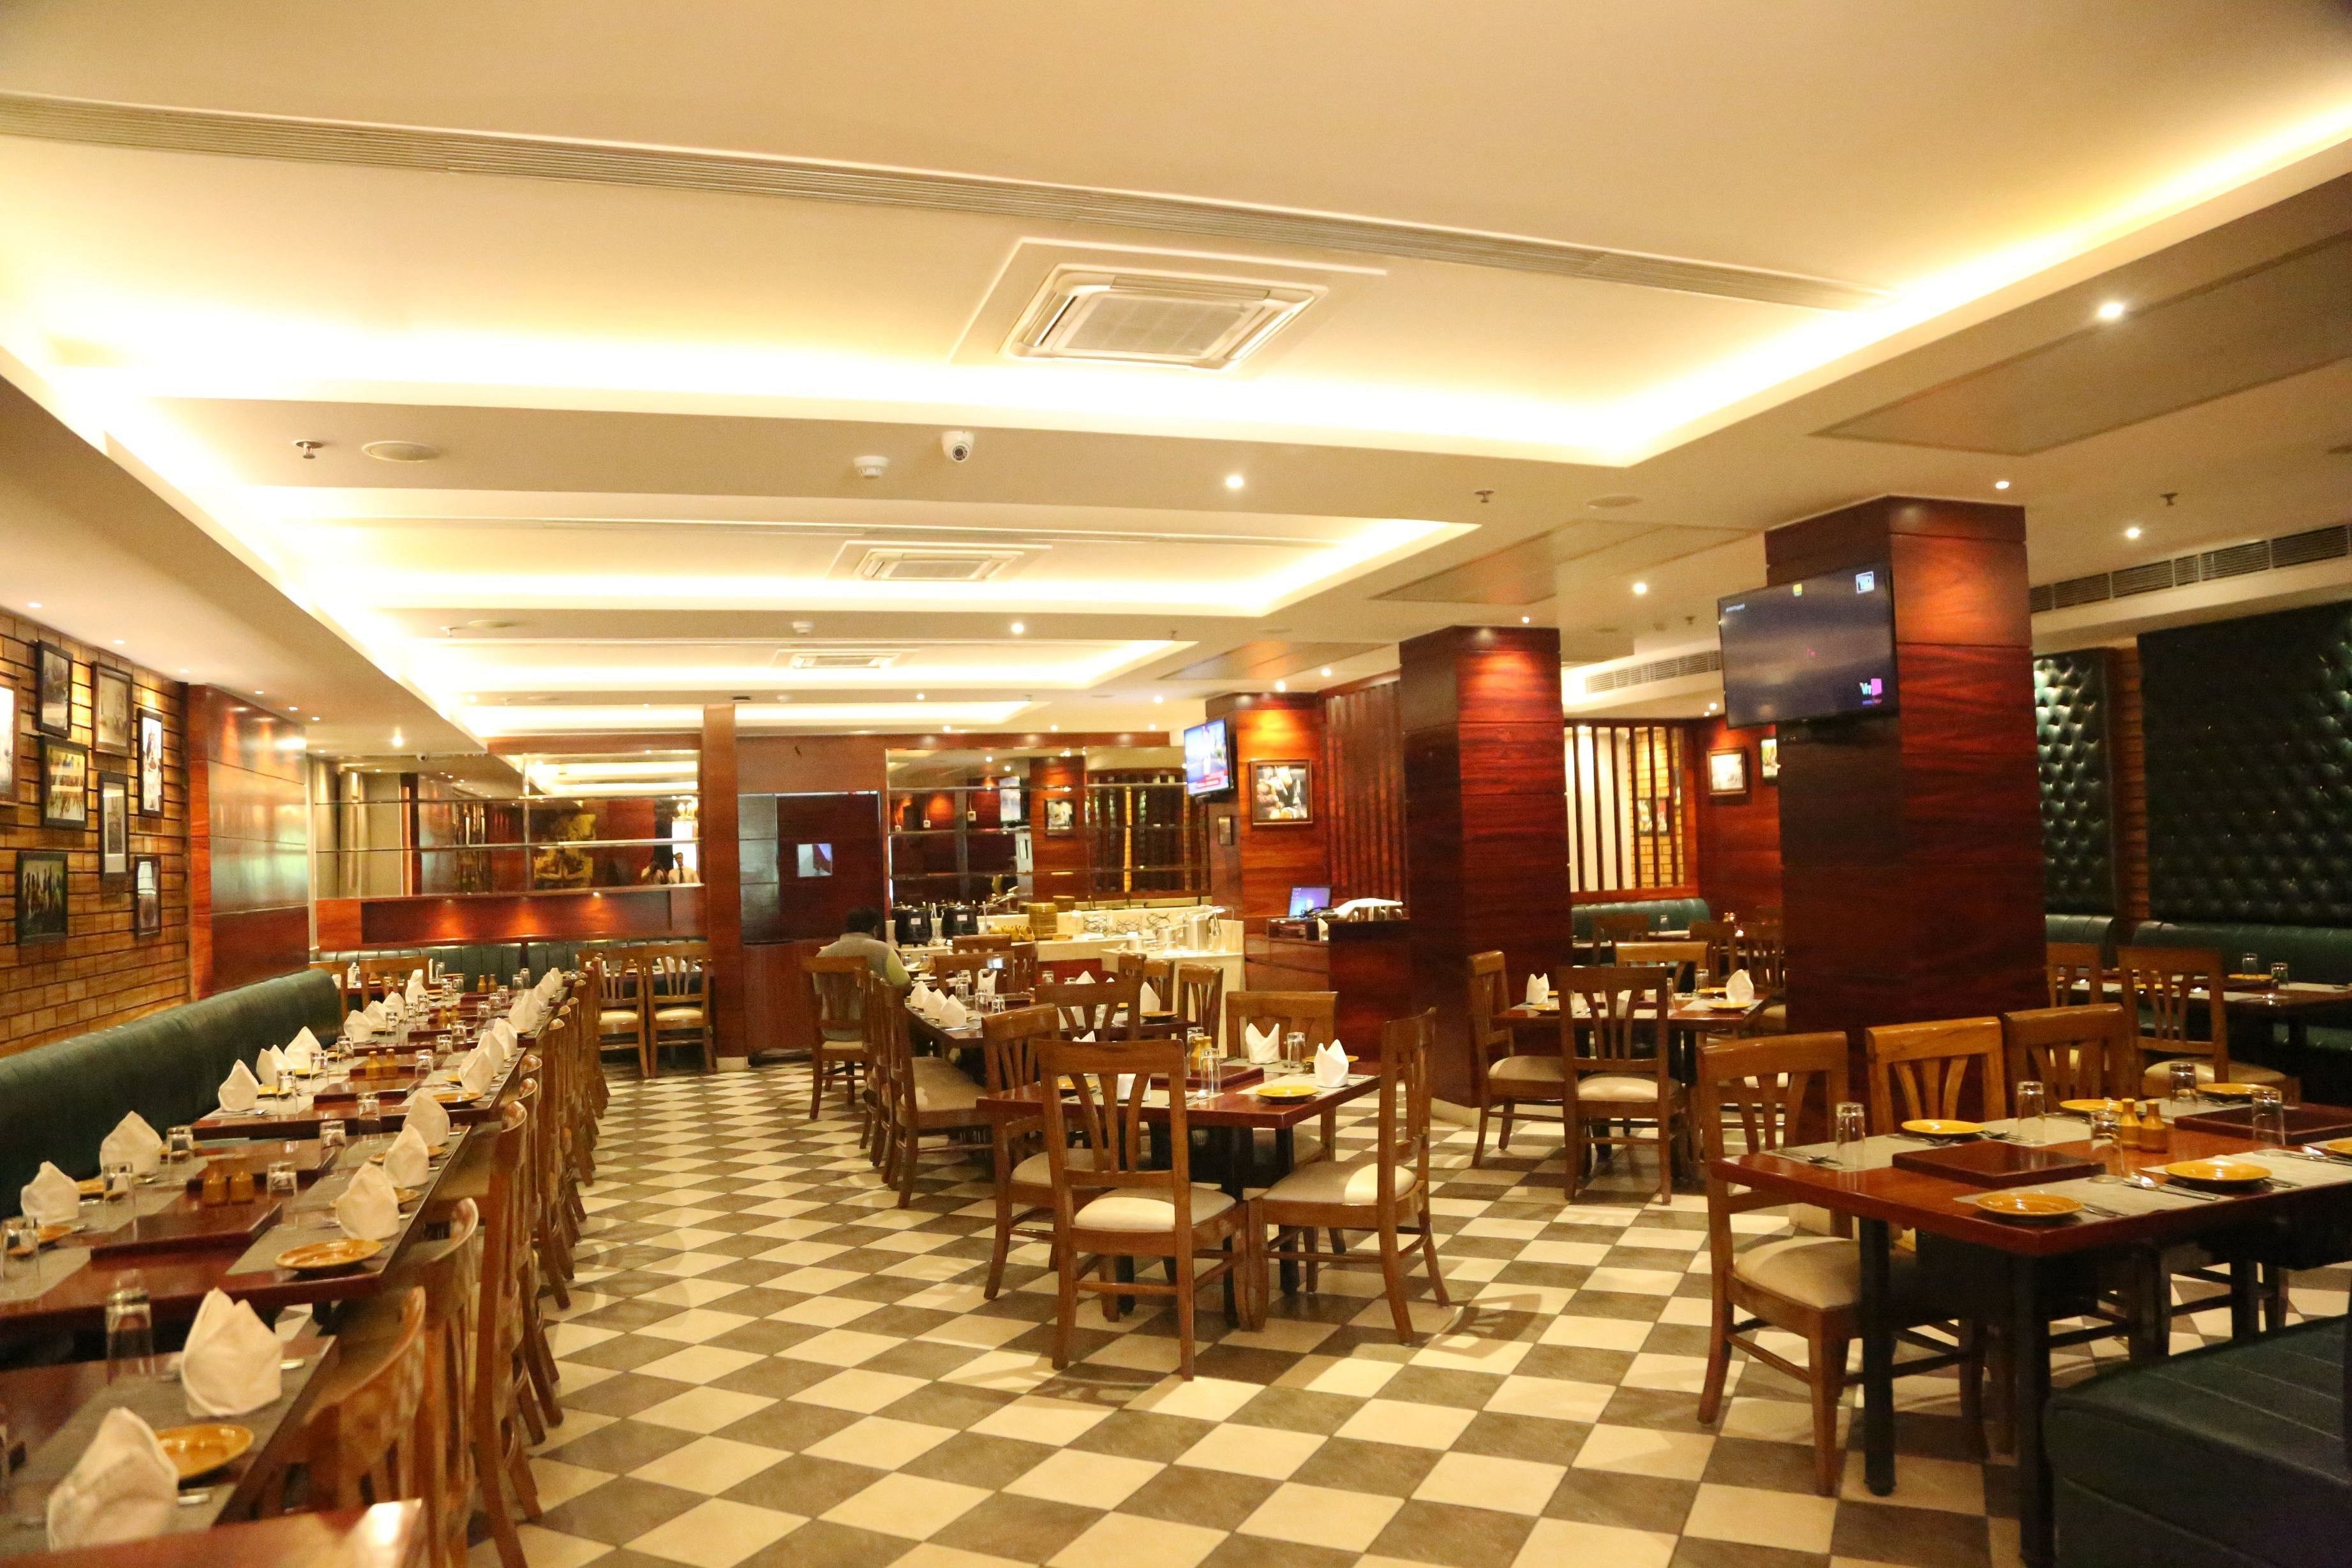 Stonfire Barbeque in Sector 62, Noida